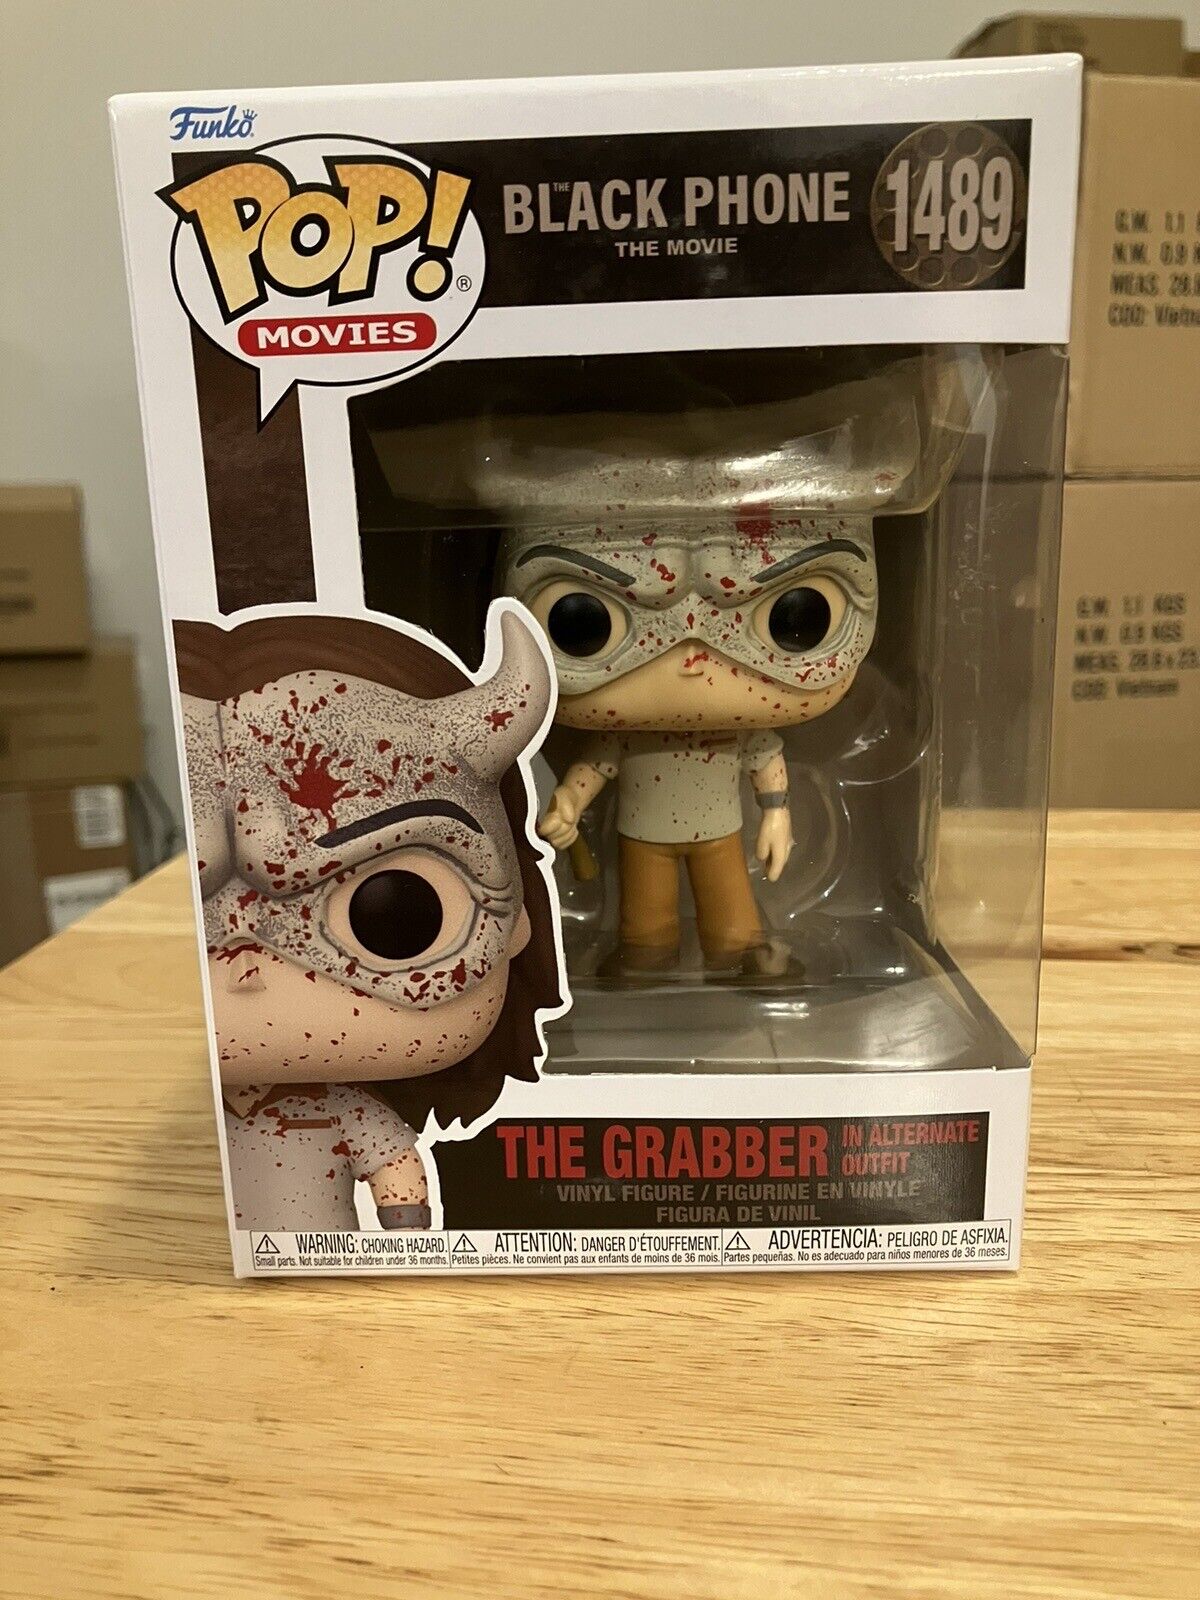 Funko Pop Vinyl: The Black Phone - Bloody The Grabber in Alternate Outfit #1489